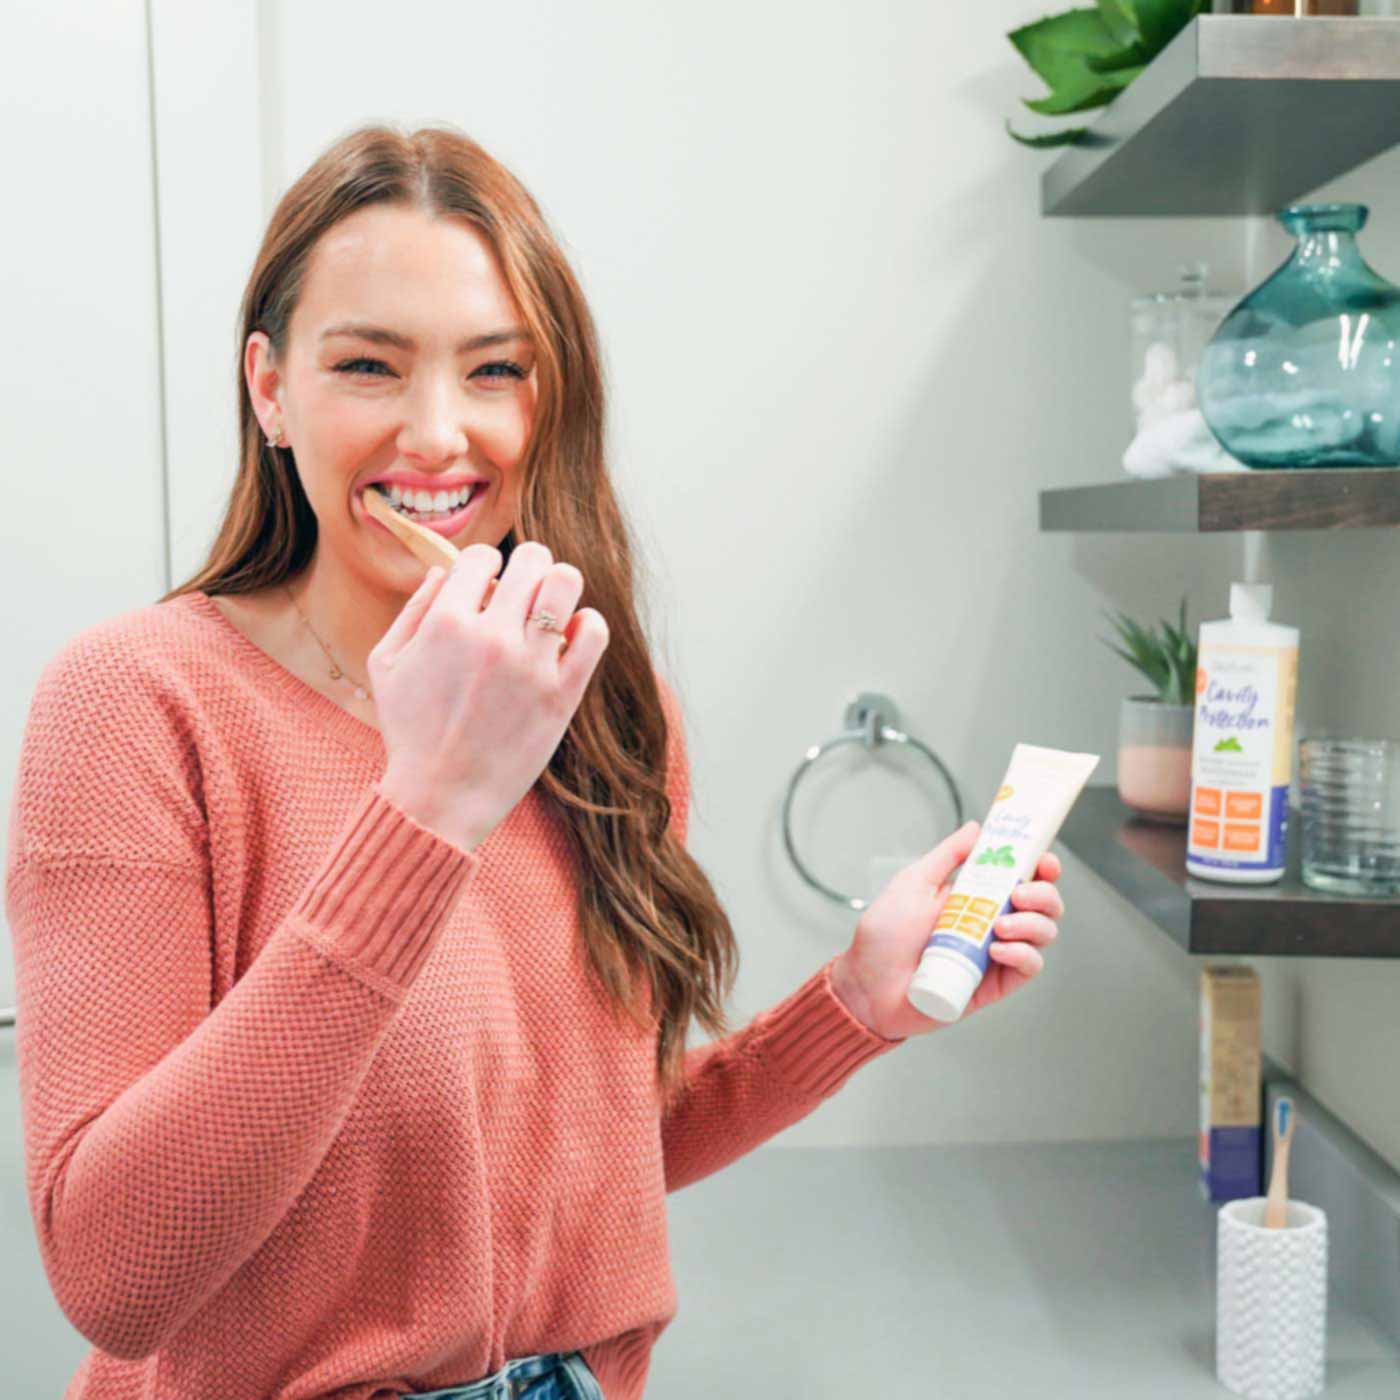 woman-smiling-while-brushing-her-teeth-with-the-oxyfresh-cavity-fighting-system-including-cavity-fighting-toothpaste-and-fluoride-mouthwash